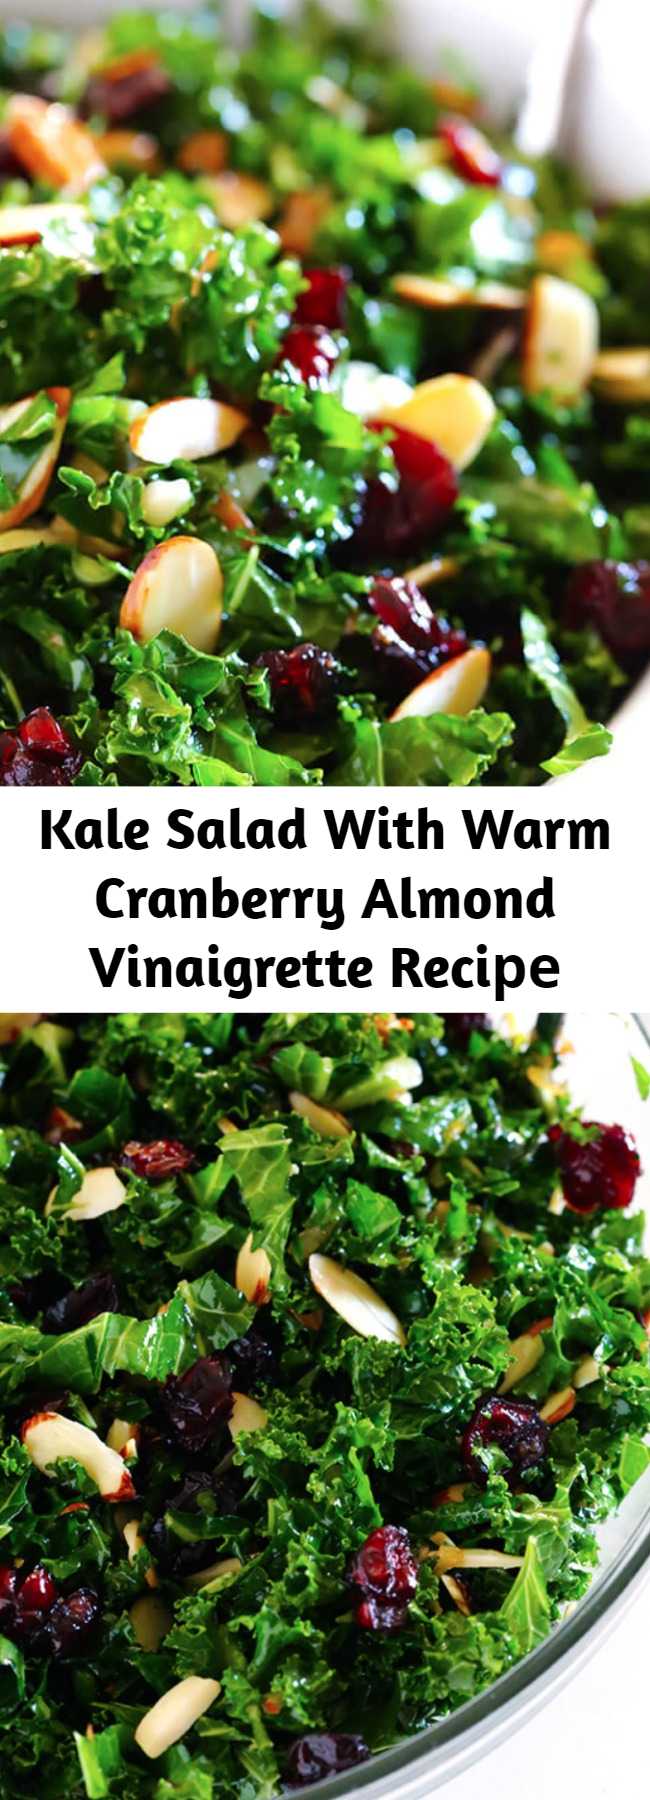 Kale Salad With Warm Cranberry Almond Vinaigrette Recipe - This healthy kale salad is topped with a warm cranberry almond vinaigrette.